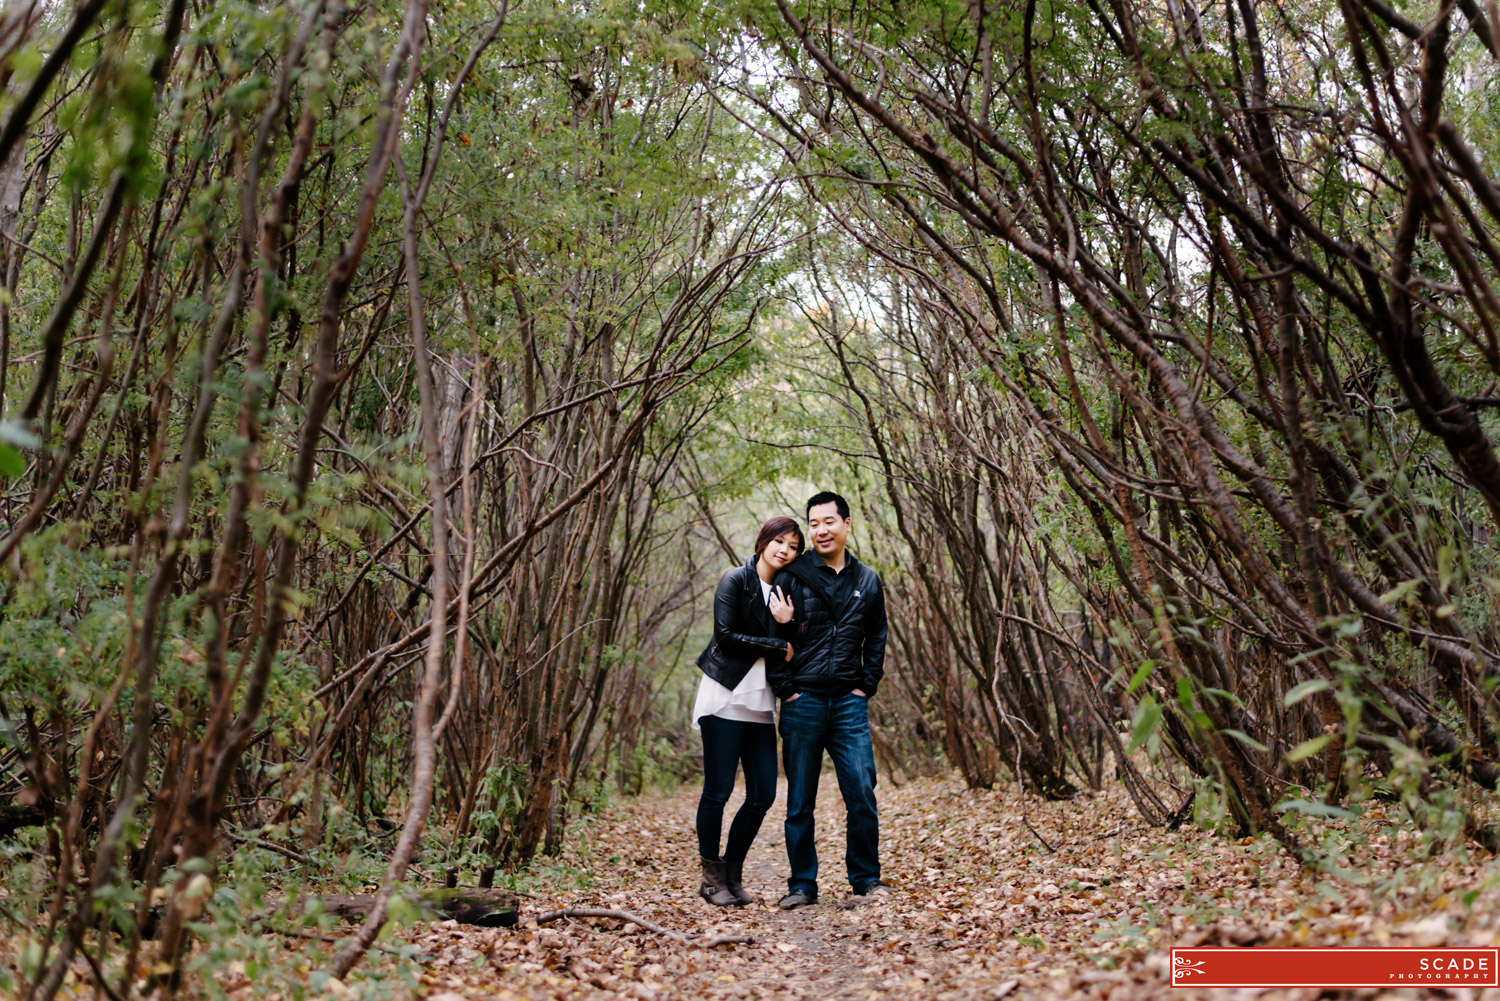 River Valley Couples Session - Dorothy and Dan - 0002.JPG